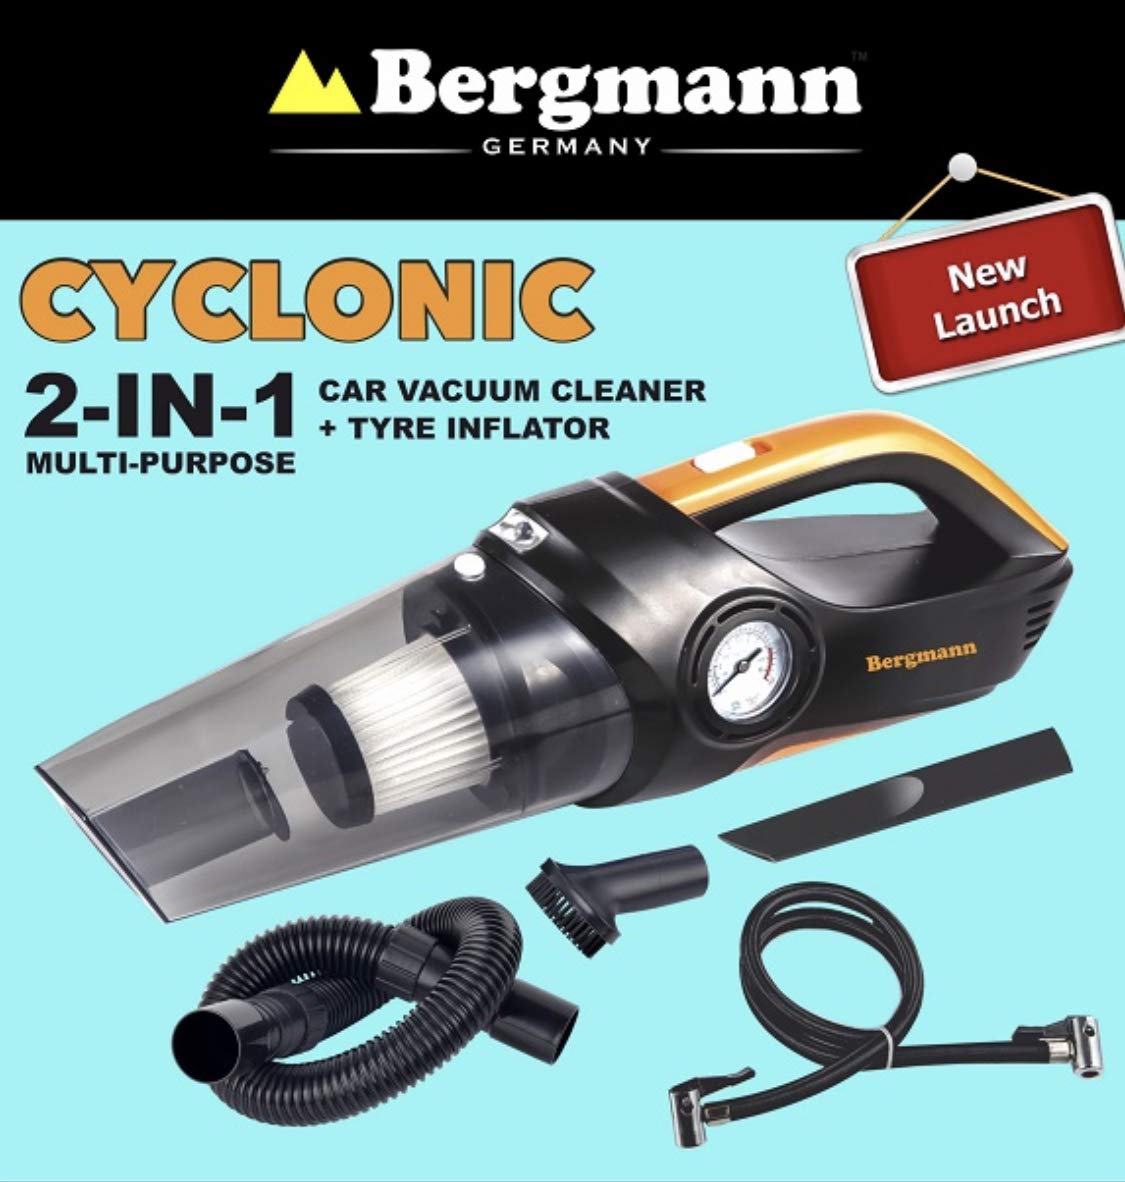 Bergmann CYCLONIC 2-in1 Car Vacuum Cleaner and Inflator ( BVT120A )